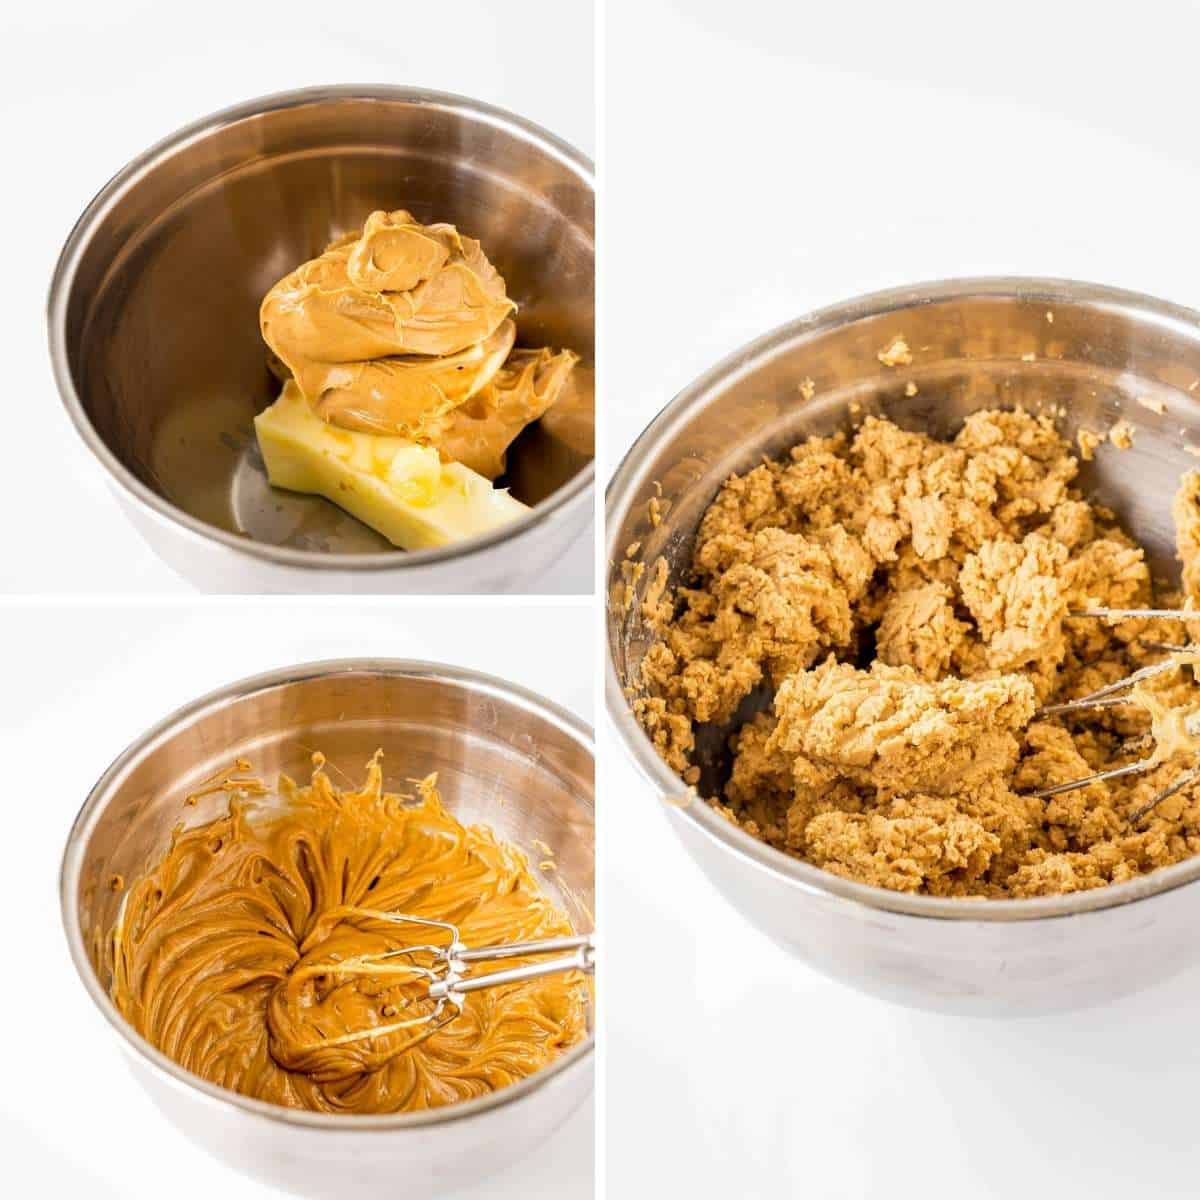 Collage of three images showing how to make the peanut butter filling